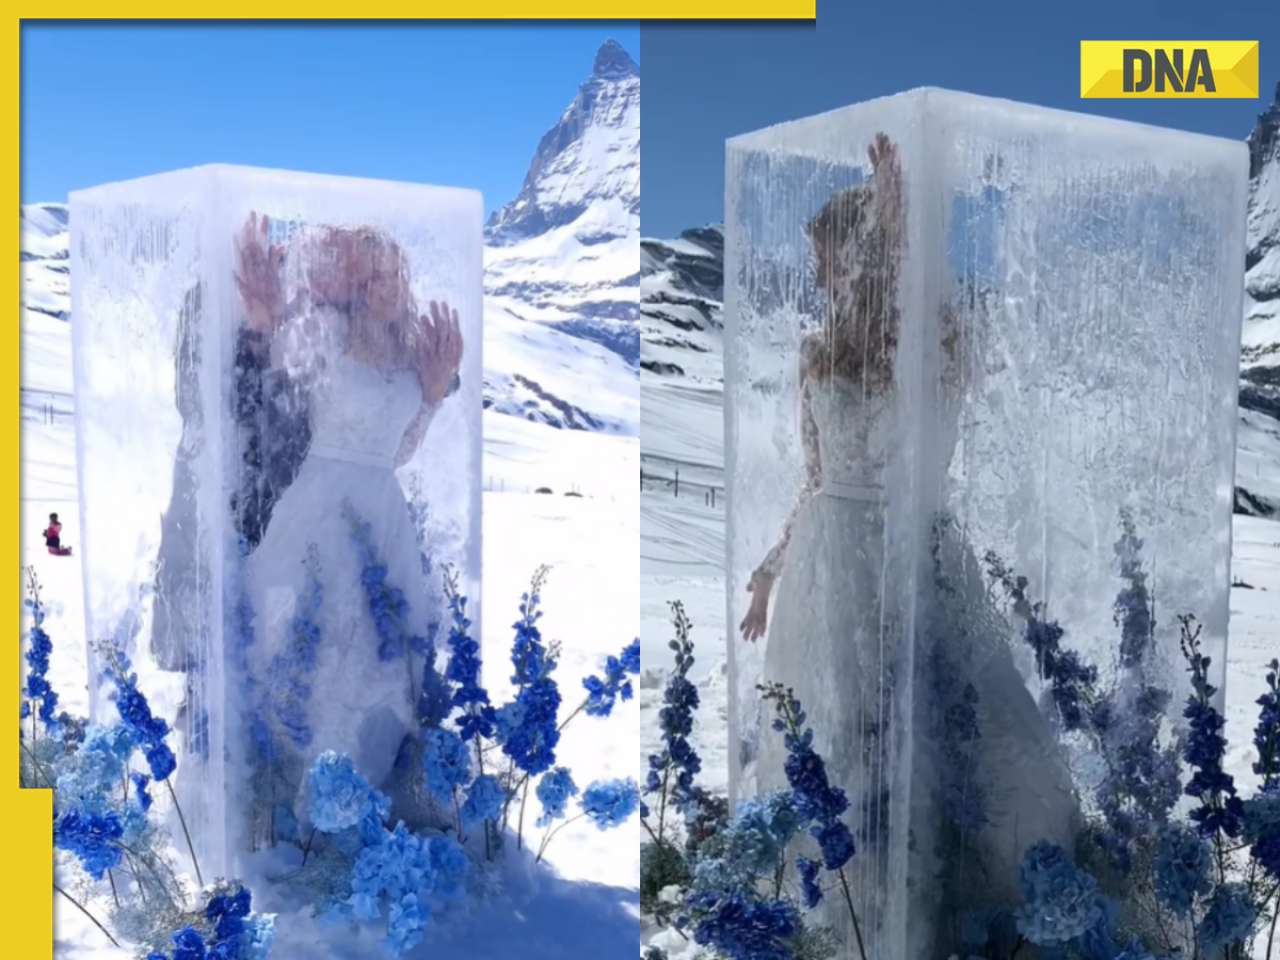 Viral video: Bride makes dramatic entrance from giant ice cube at snowy Alpine wedding in Switzerland